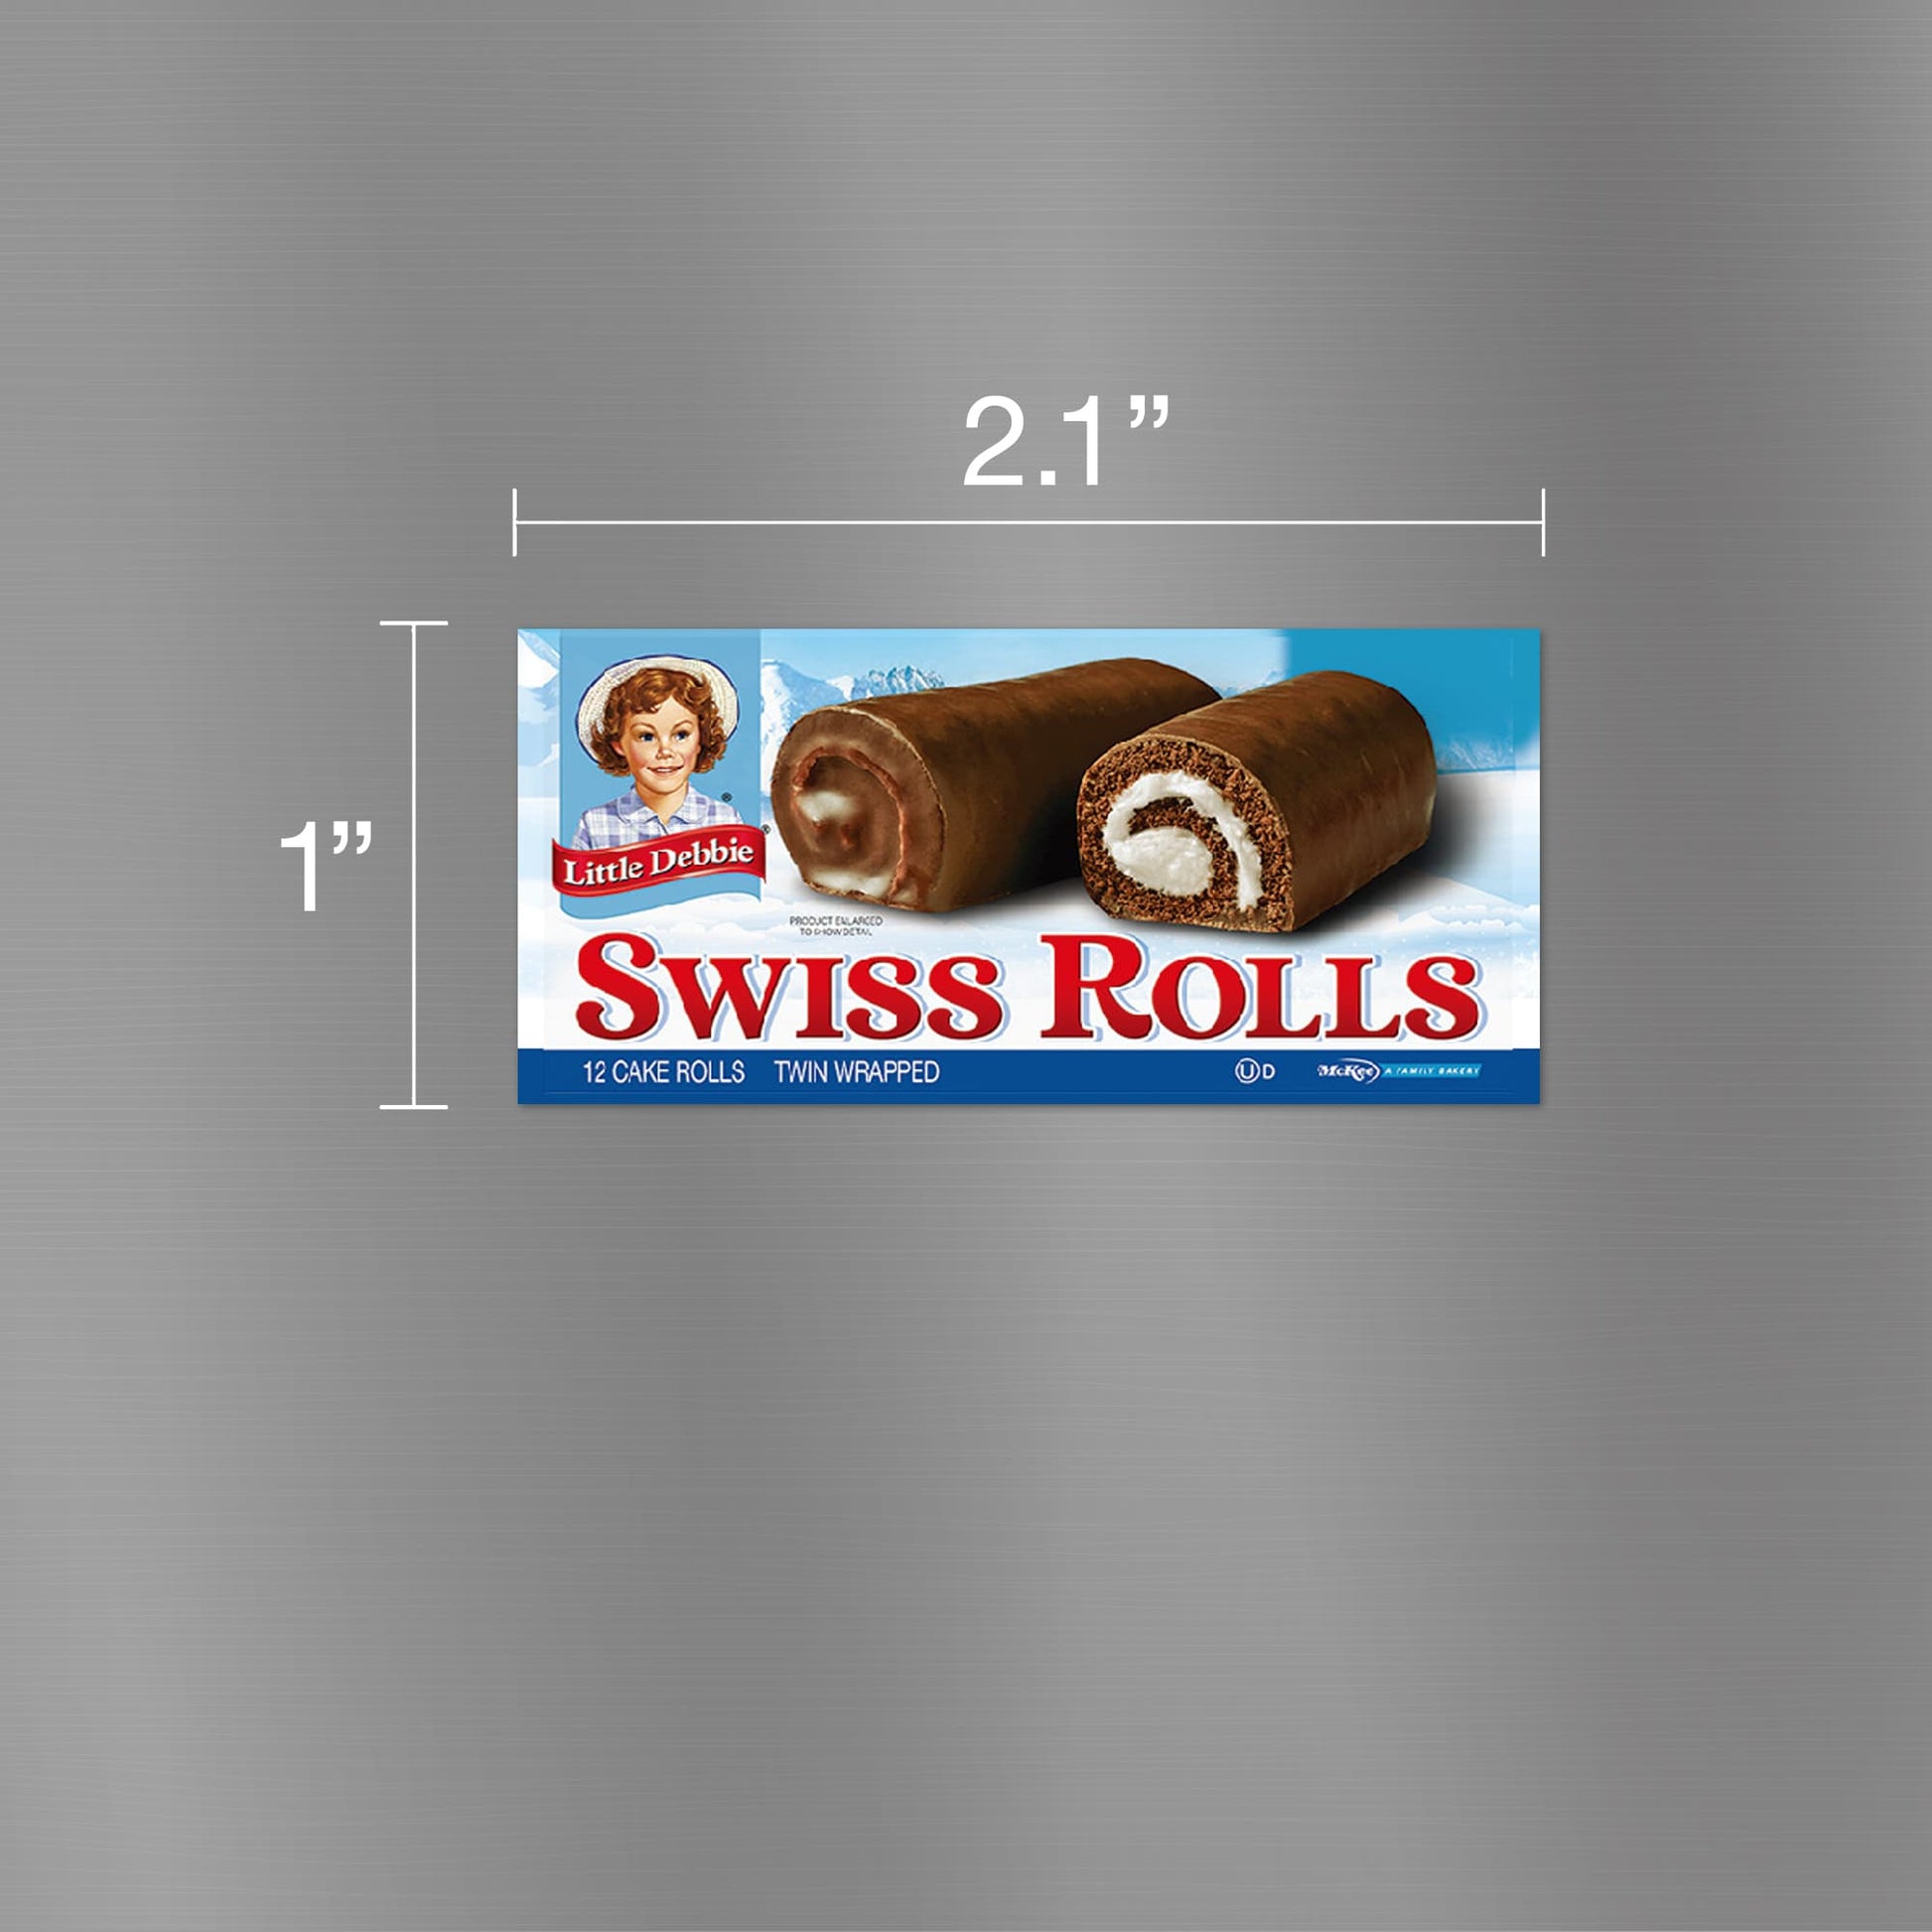 Image of a Little Debbie Swiss Rolls carton magnet, measuring 2.1 inches wide and 1 inch tall. The magnet displays the classic blue and red packaging featuring two Swiss Rolls with their chocolate coating and creamy swirl filling visible. The Little Debbie logo is positioned at the top left, and the text 'Swiss Rolls' in bold red letters is below, with the information '12 cake rolls, twin wrapped' noted on the package.